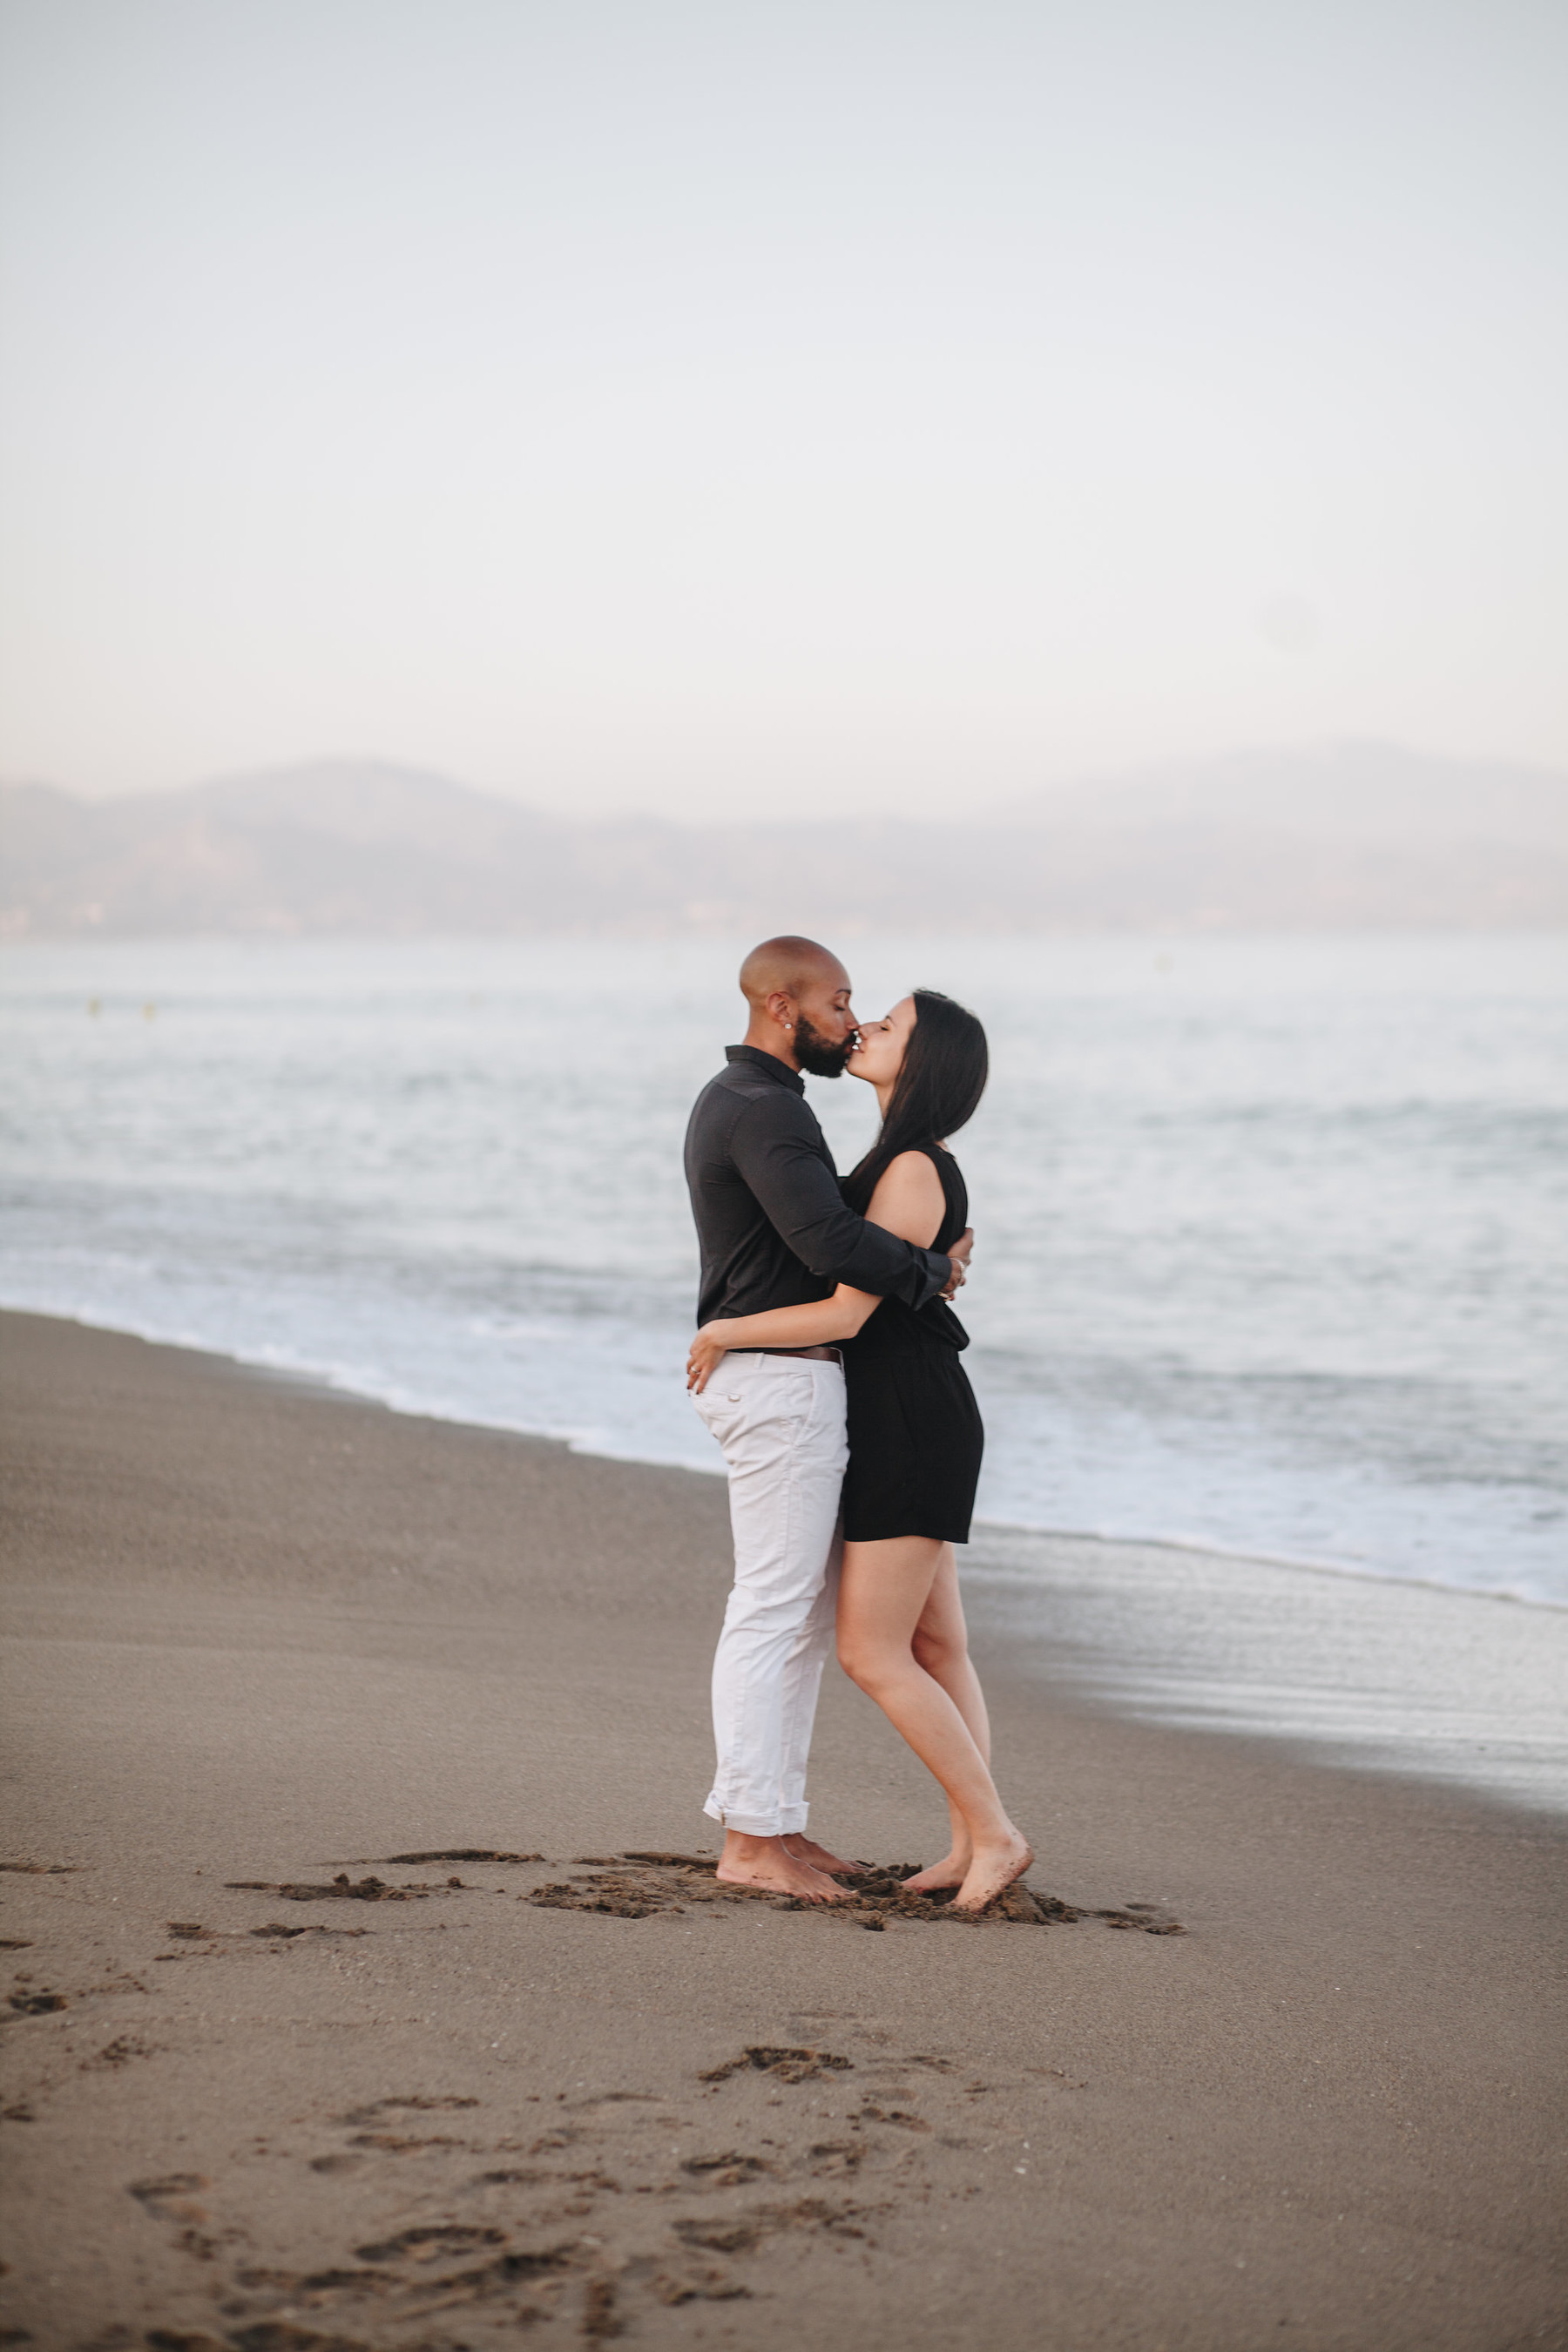 Love story photo session in Torremolinos